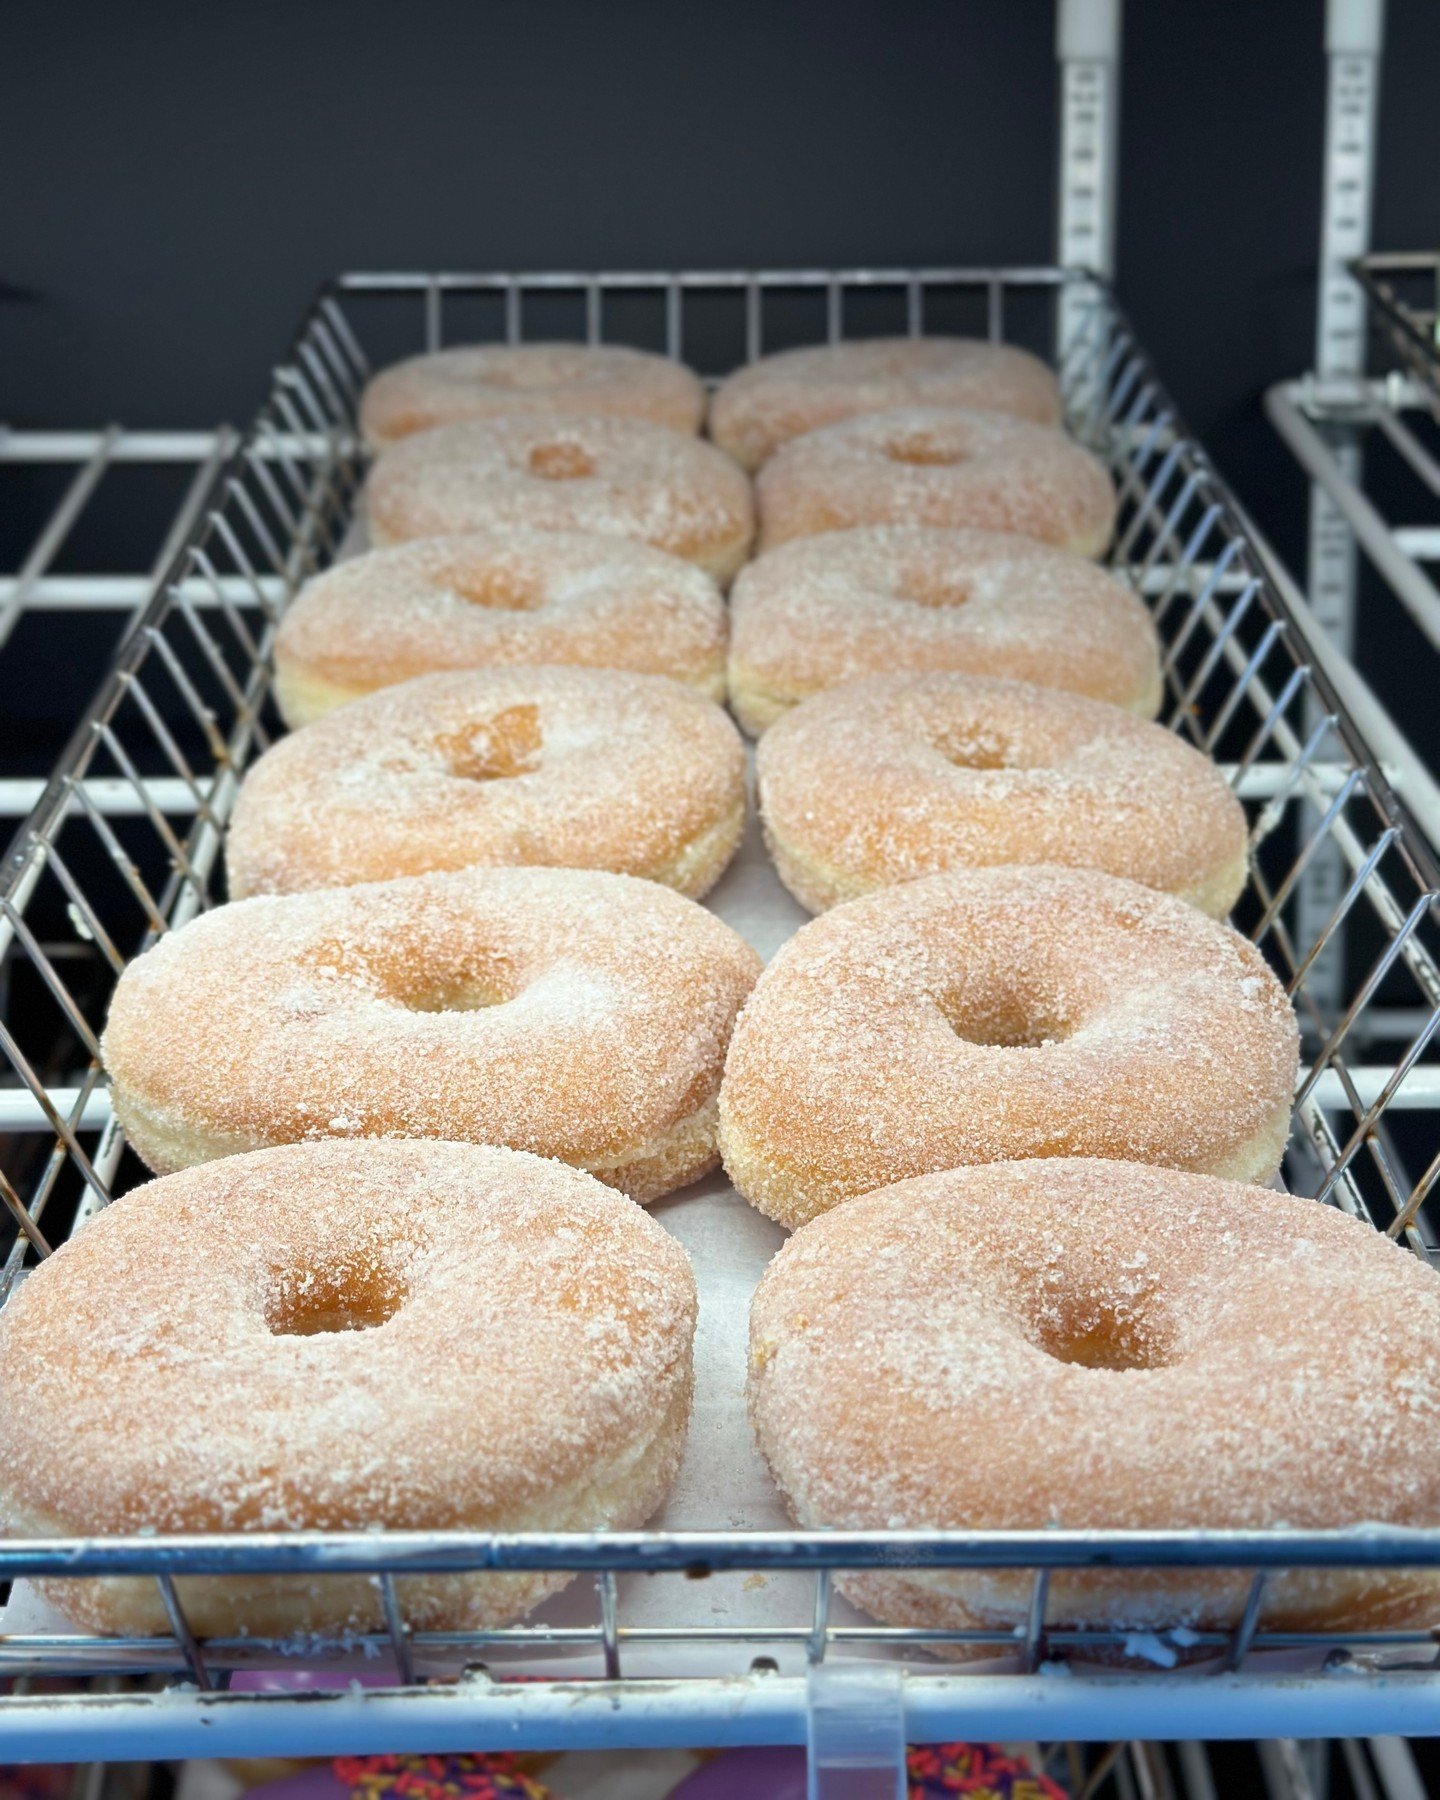 🍩☕🌞 Start your morning on a sweet note with our classic sugar donut and a hot cup of coffee at Glenn Wayne Bakery.

📍 Bohemia, NY
📞 631-256-5140
📞 631-319-6266
🌐 www.GlennWayne.com

#Bakery #BreakfastTreats #CoffeeTime #Donuts #GlennWayneBakery